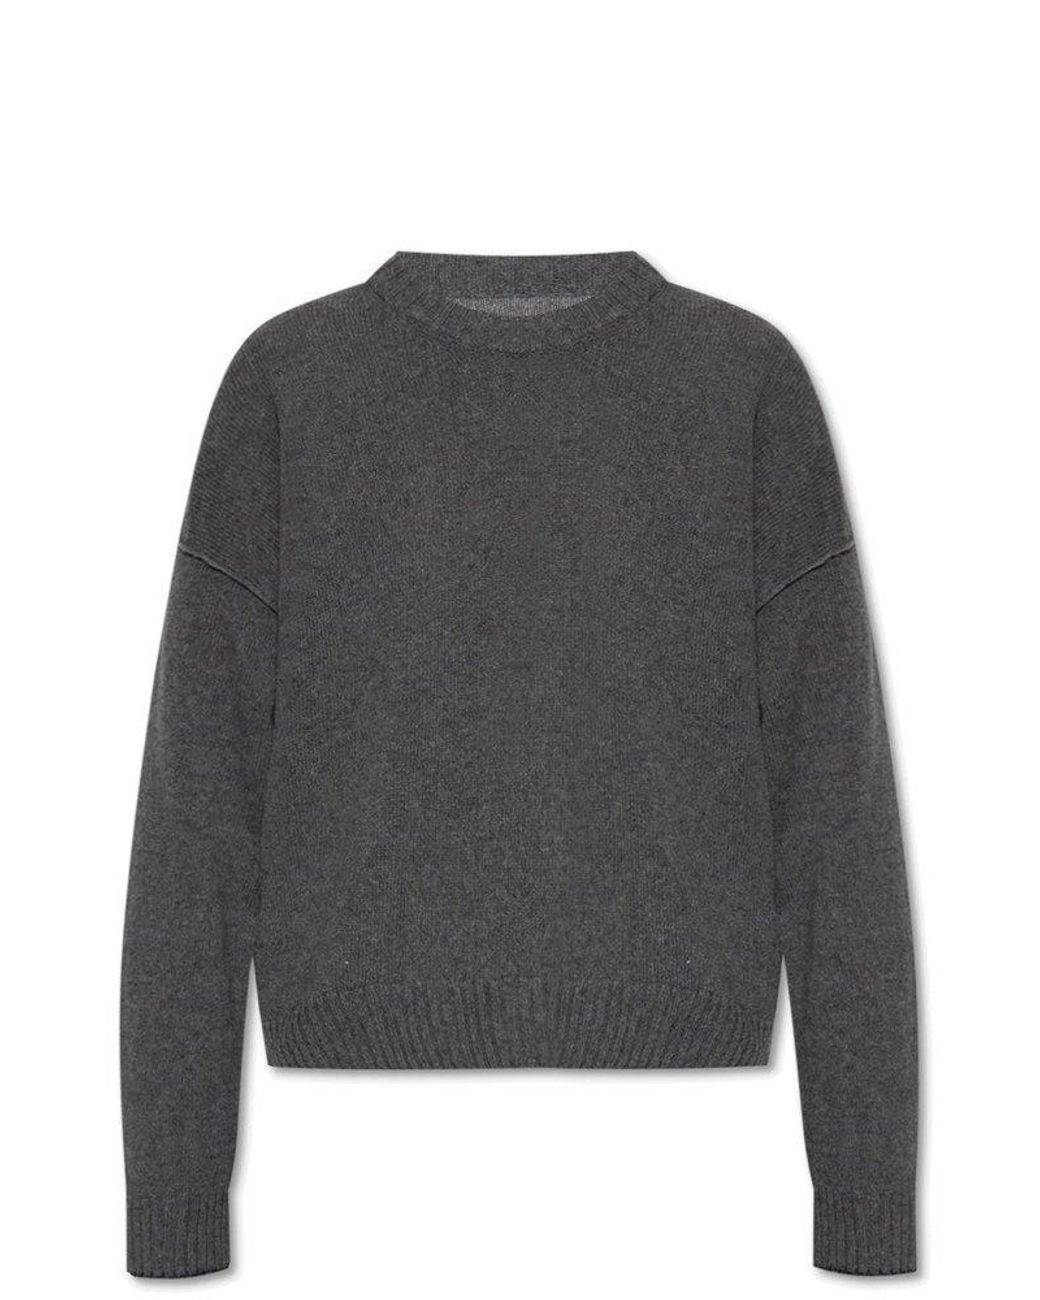 Zadig & Voltaire 'markus' Cashmere Sweater in Gray | Lyst